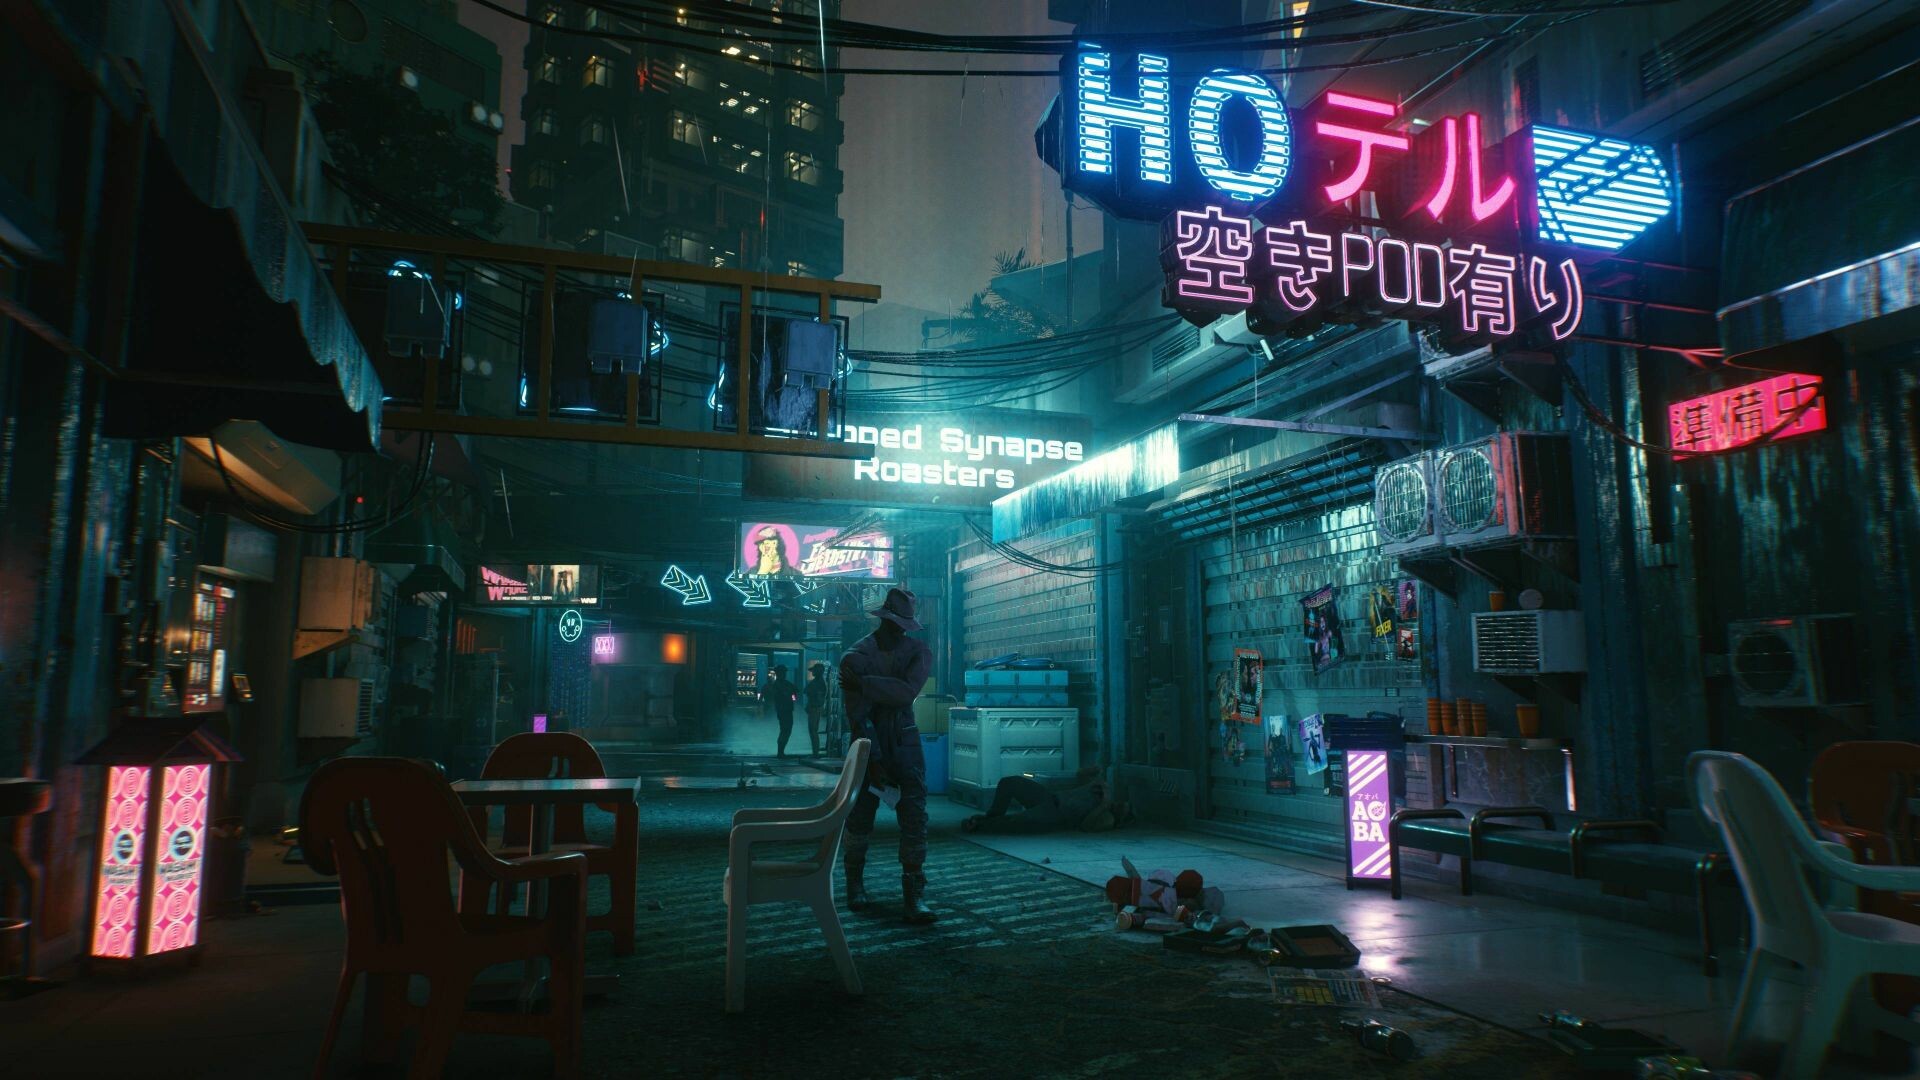 Cyberpunk 2077: The lead game character is V, an urban mercenary and cyberpunk who takes on dangerous jobs for money. 1920x1080 Full HD Wallpaper.